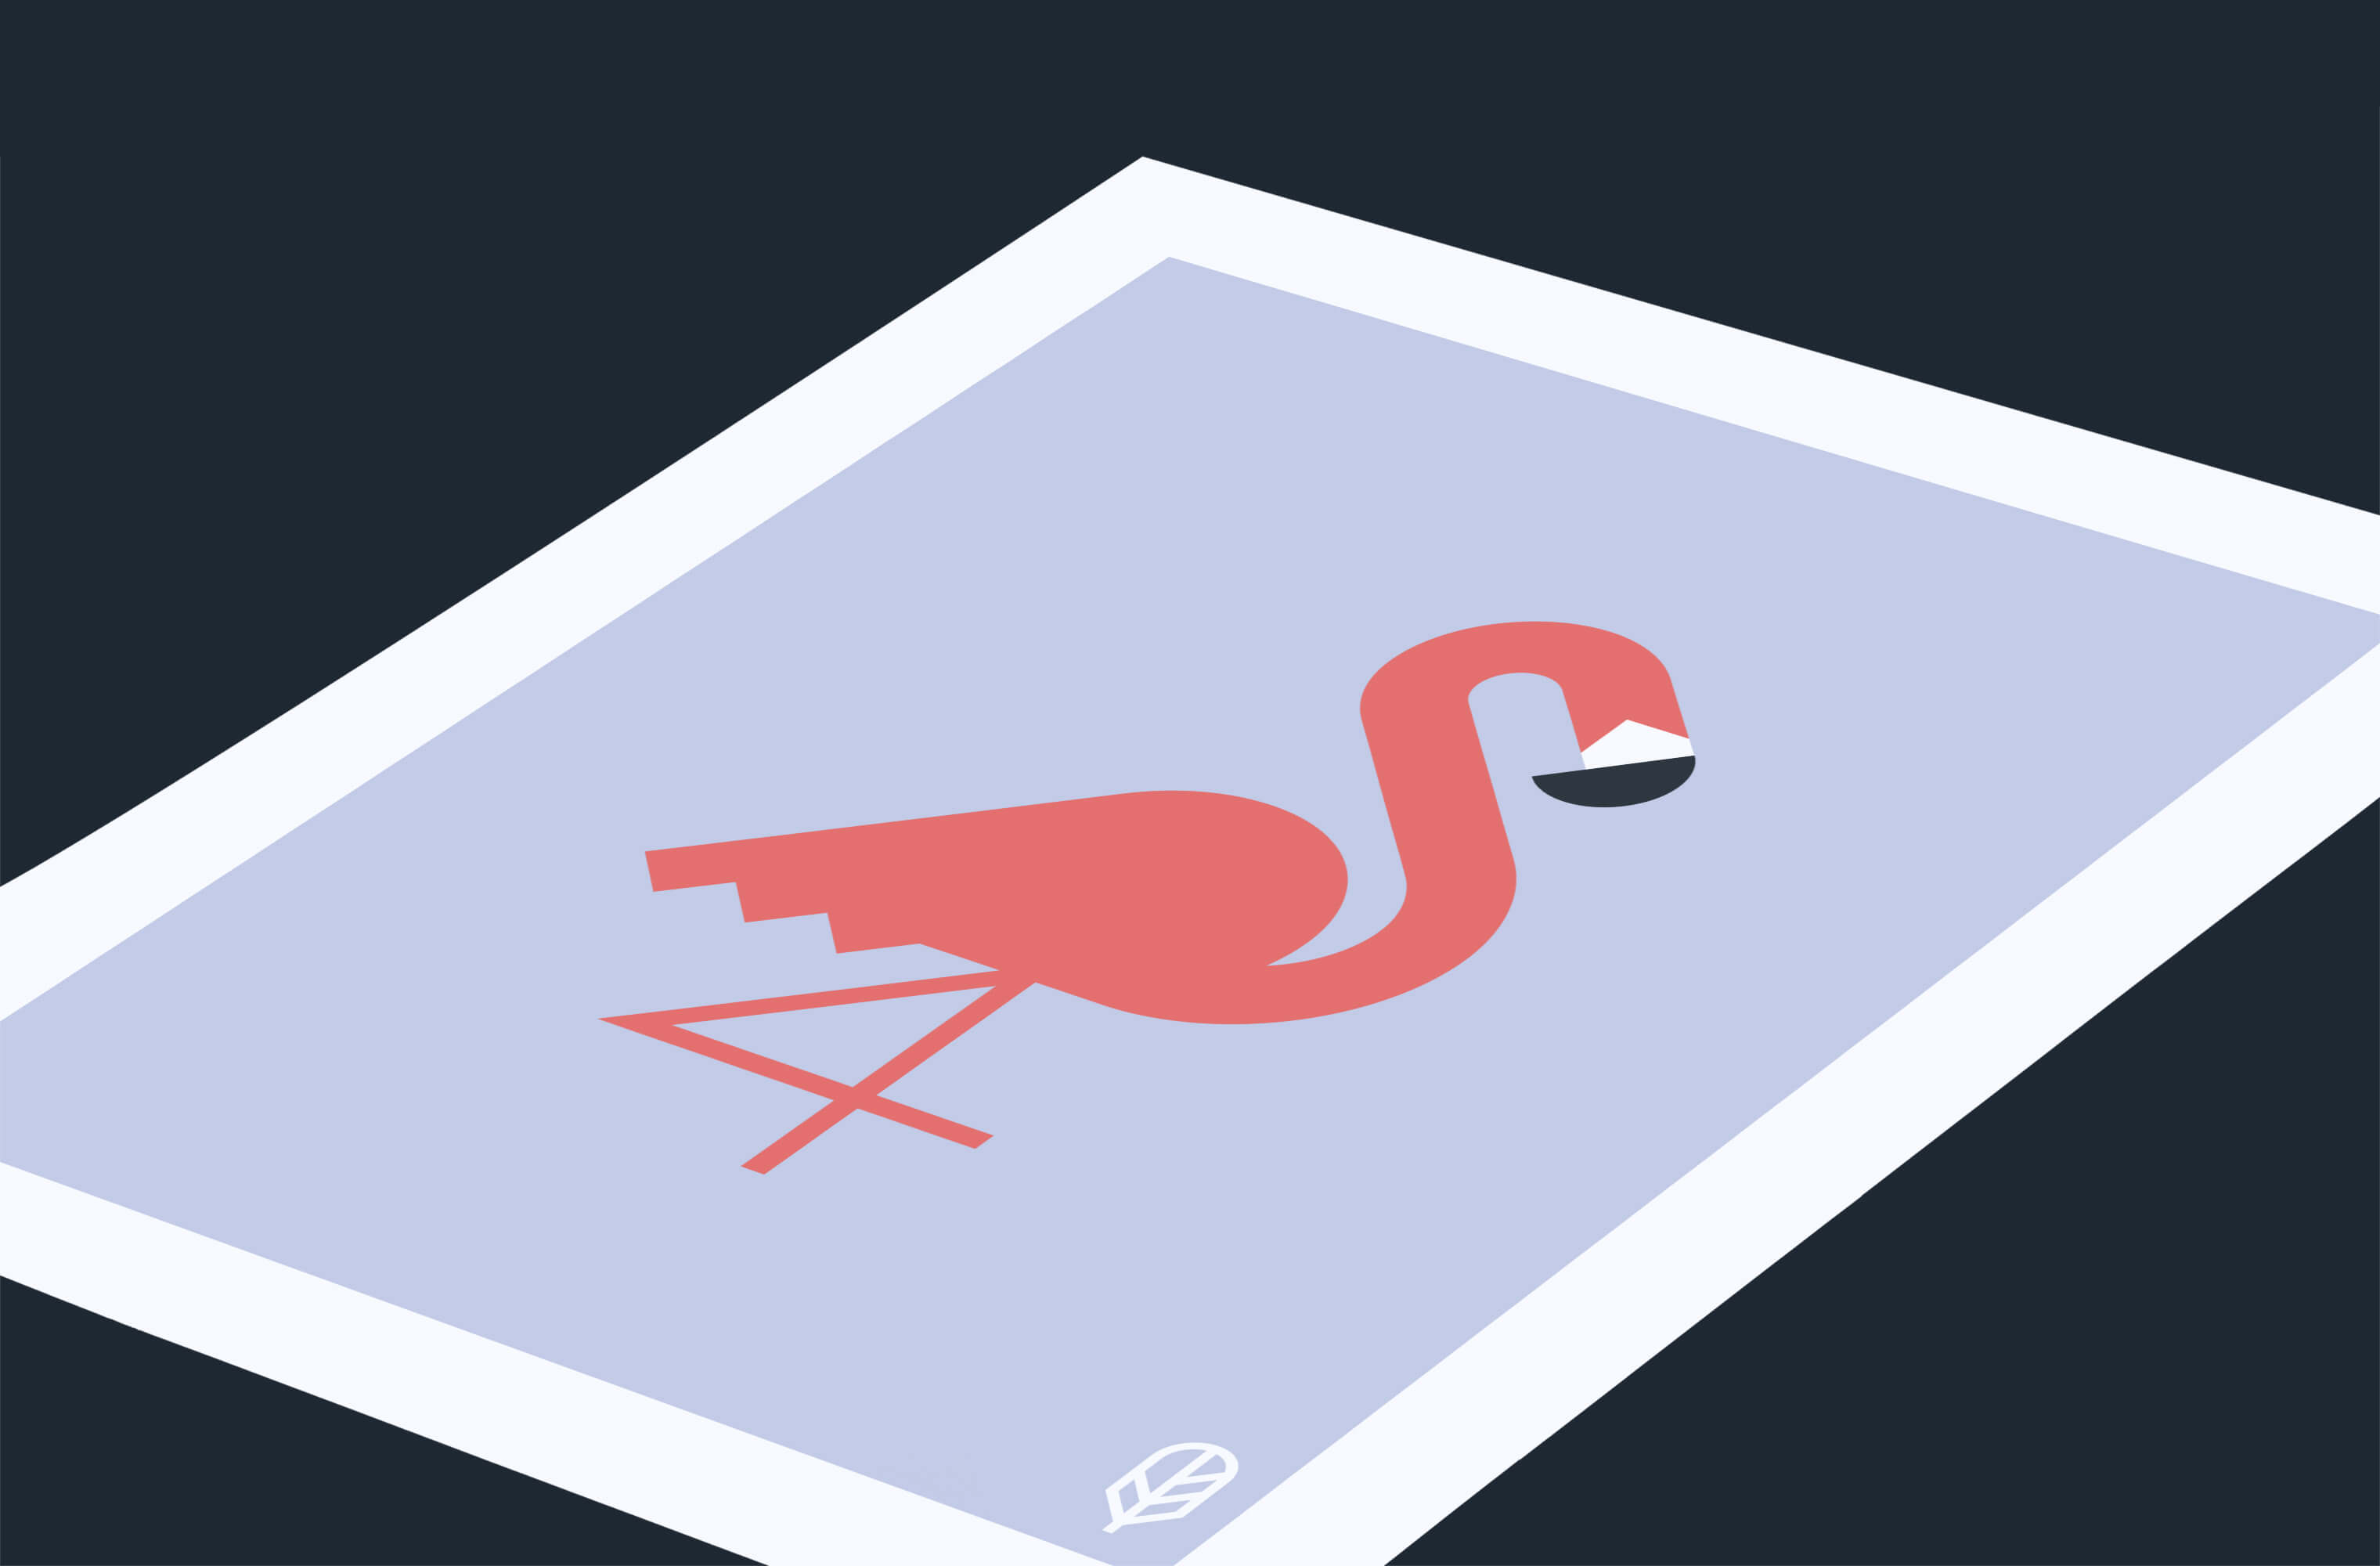 Flock Together print displaying the illustration of a flamingo